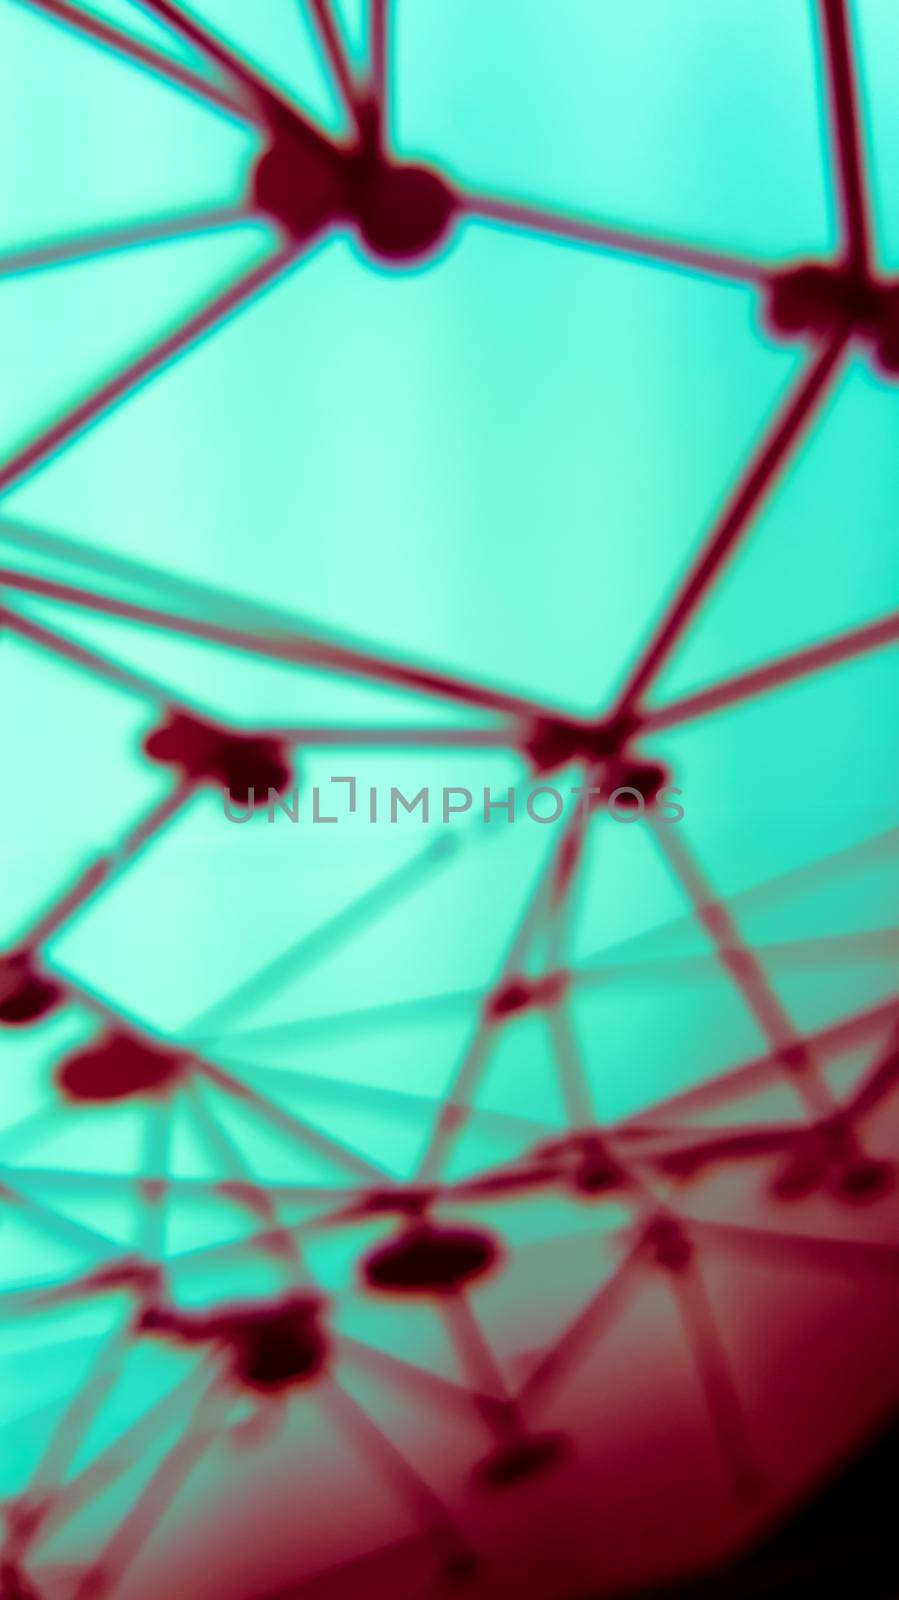 Blur background of sphere network connection. by biancoblue